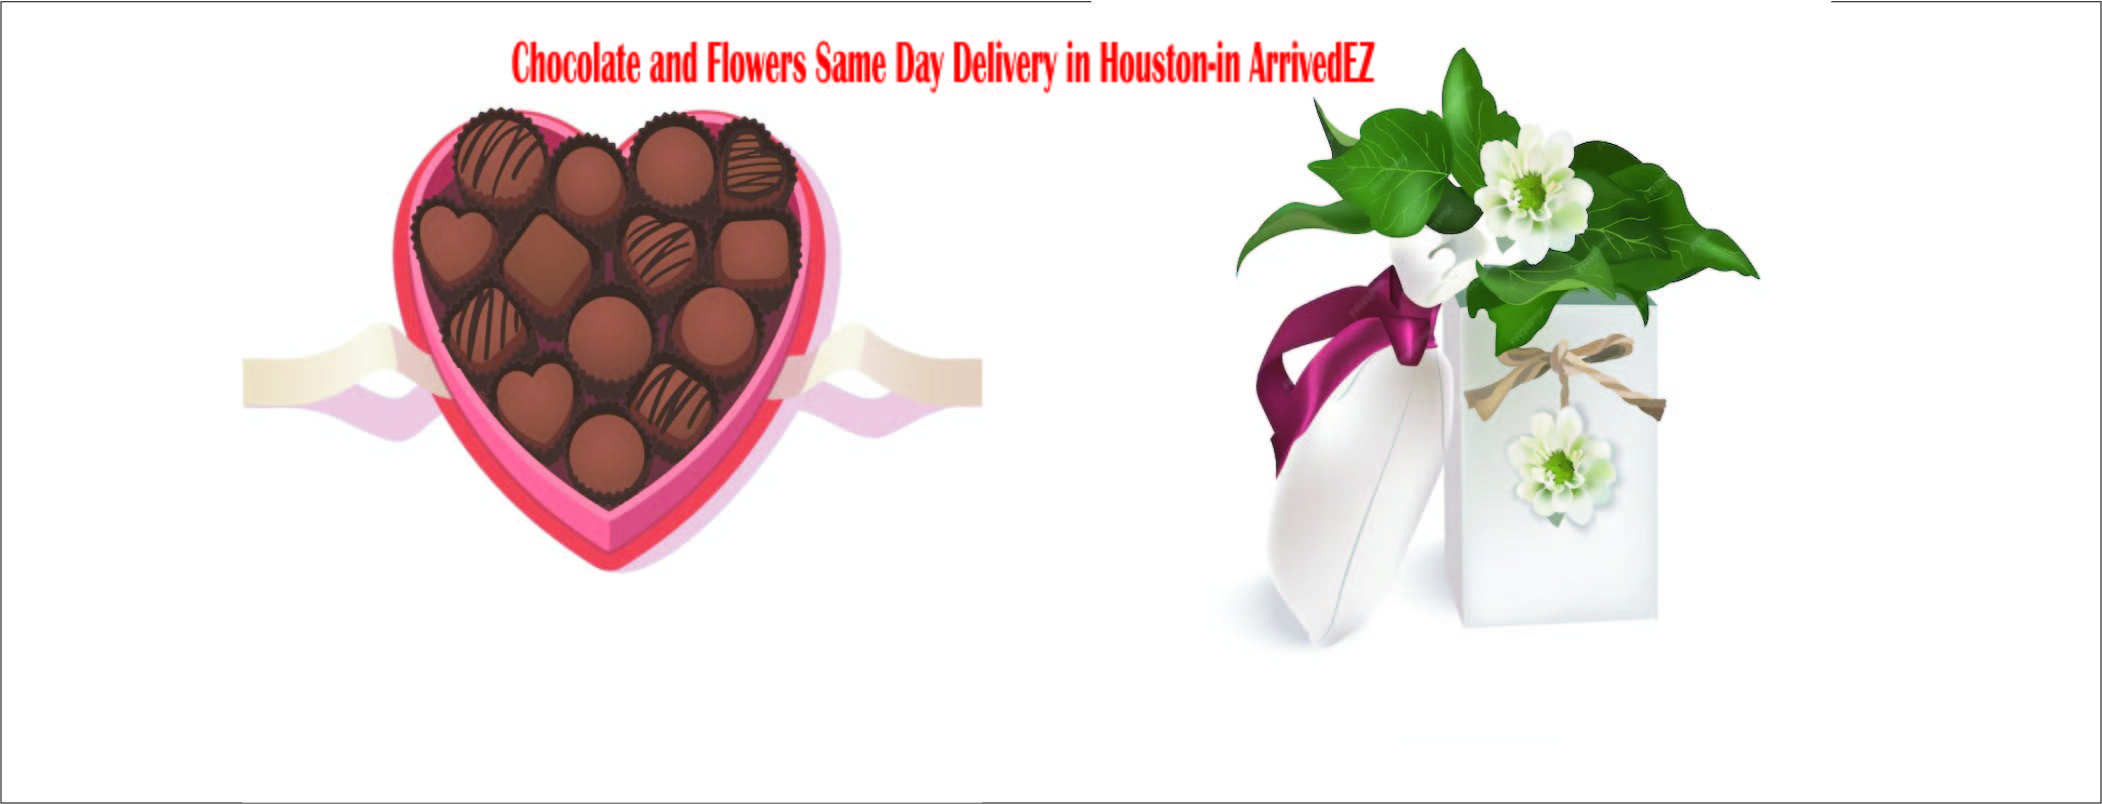 Chocolate and Flowers Same Day Delivery